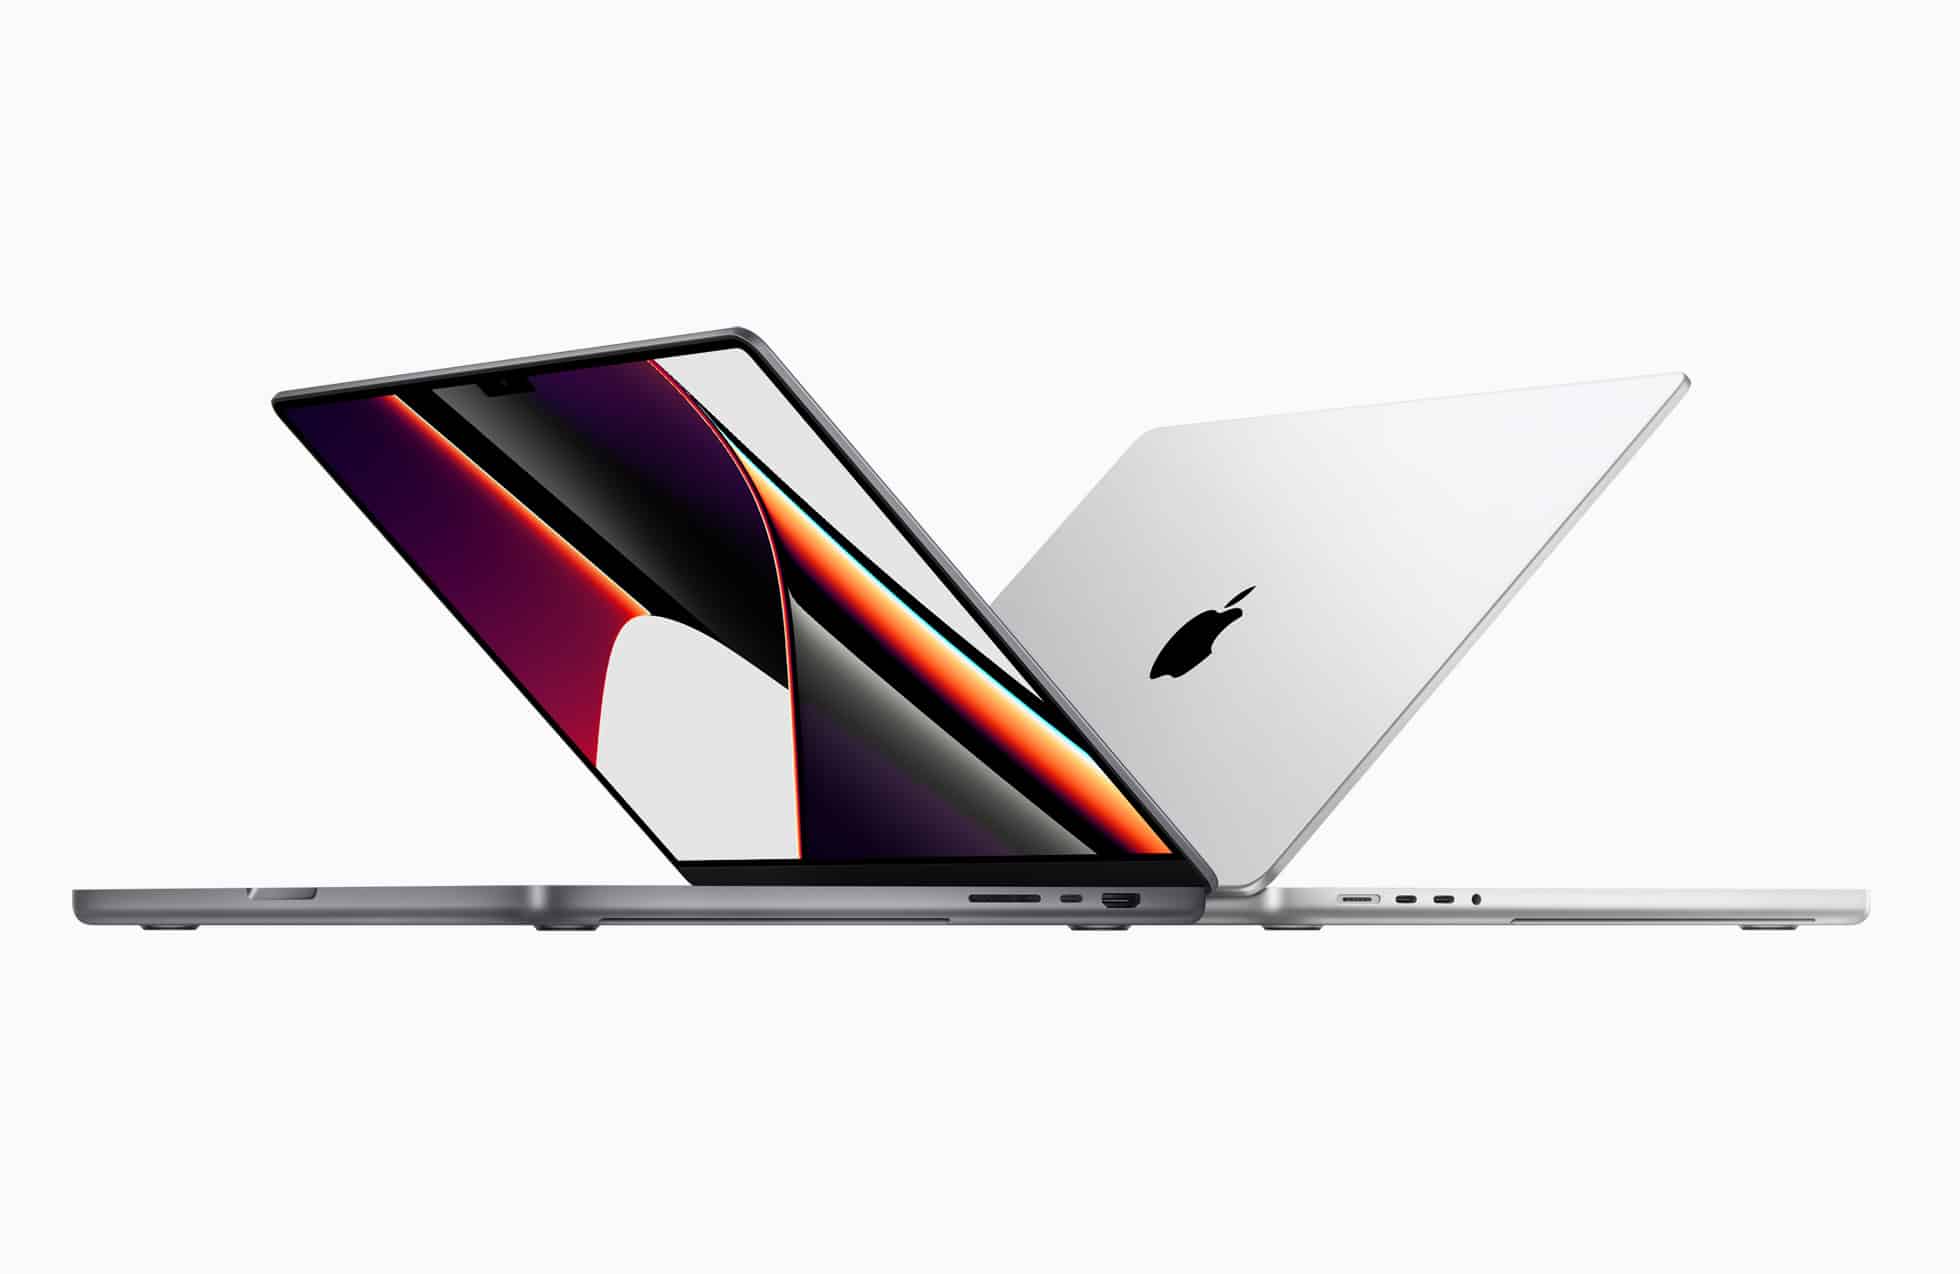 Apple announces new MacBook Pro with M1 Pro and M1 Max chips